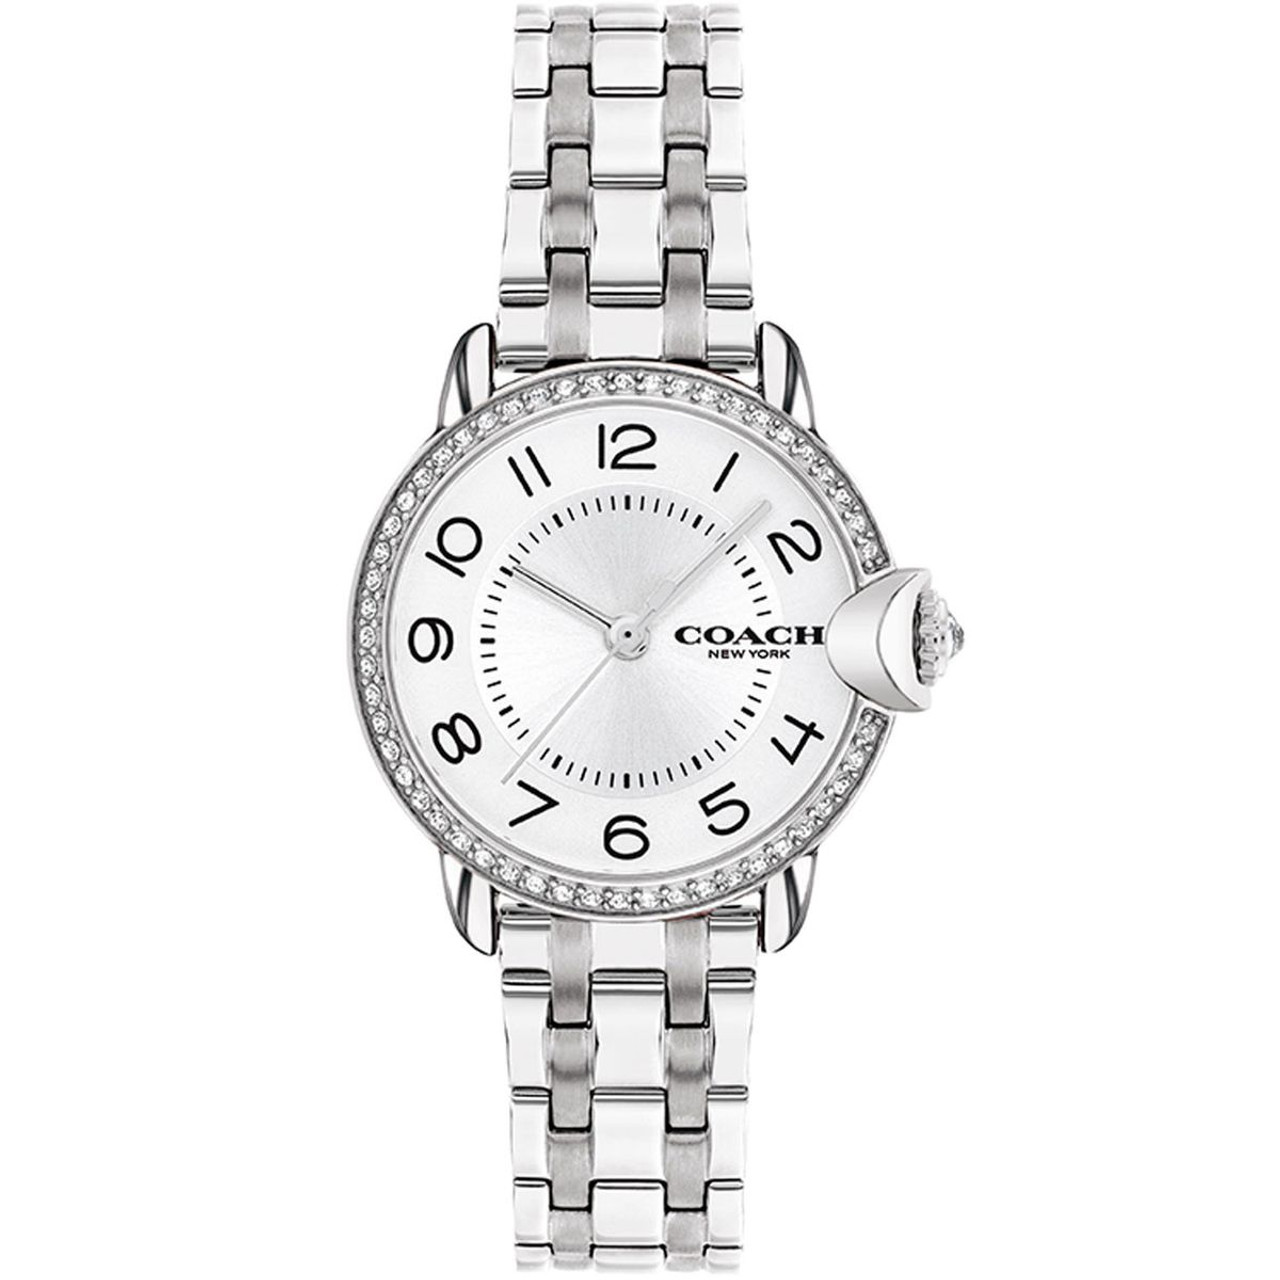 Coach Women's Arden White-Dial Watch product image